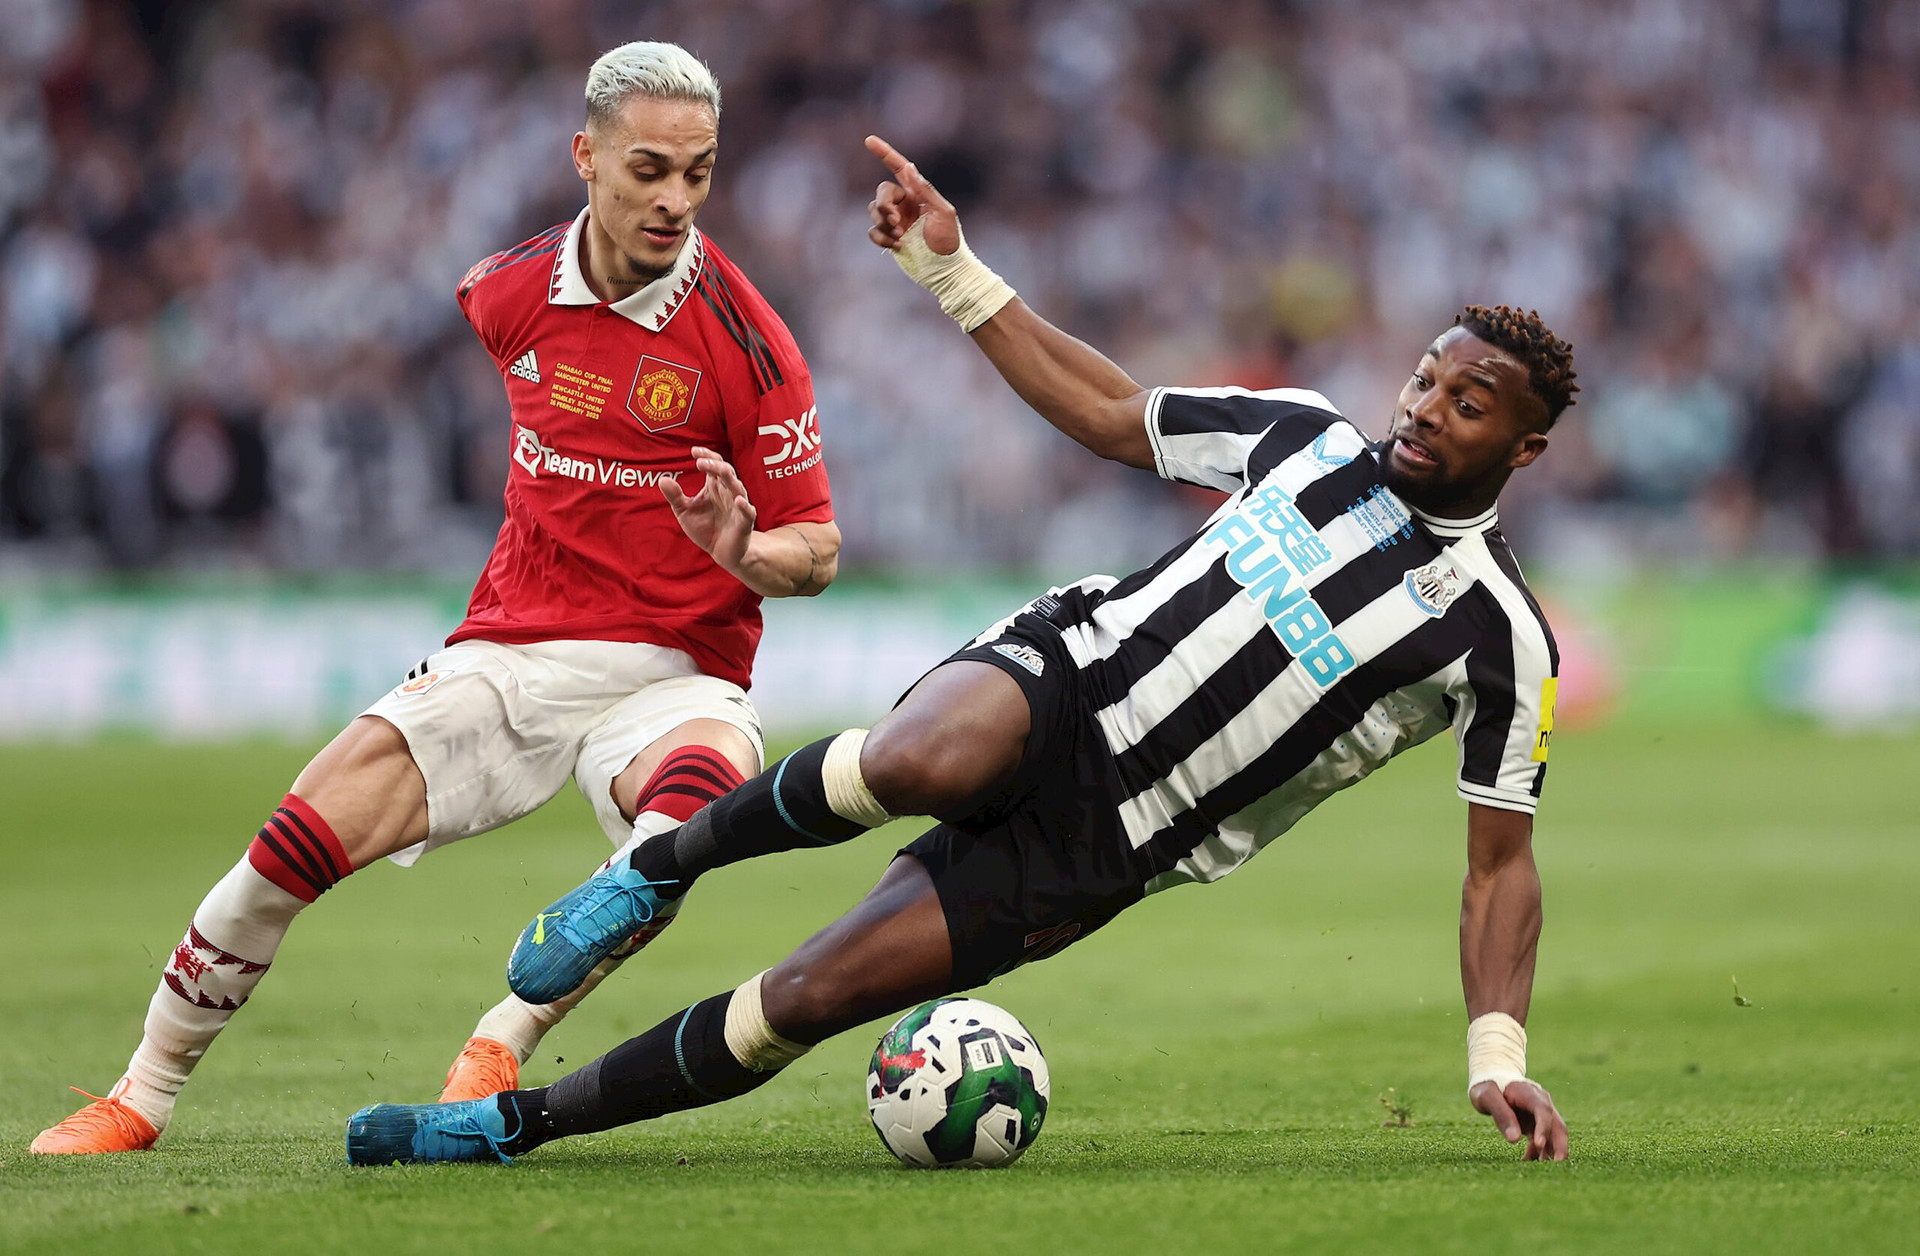 manchester-united-v-newcastle-united-carabao-cup-final-4-scaled-1.jpg